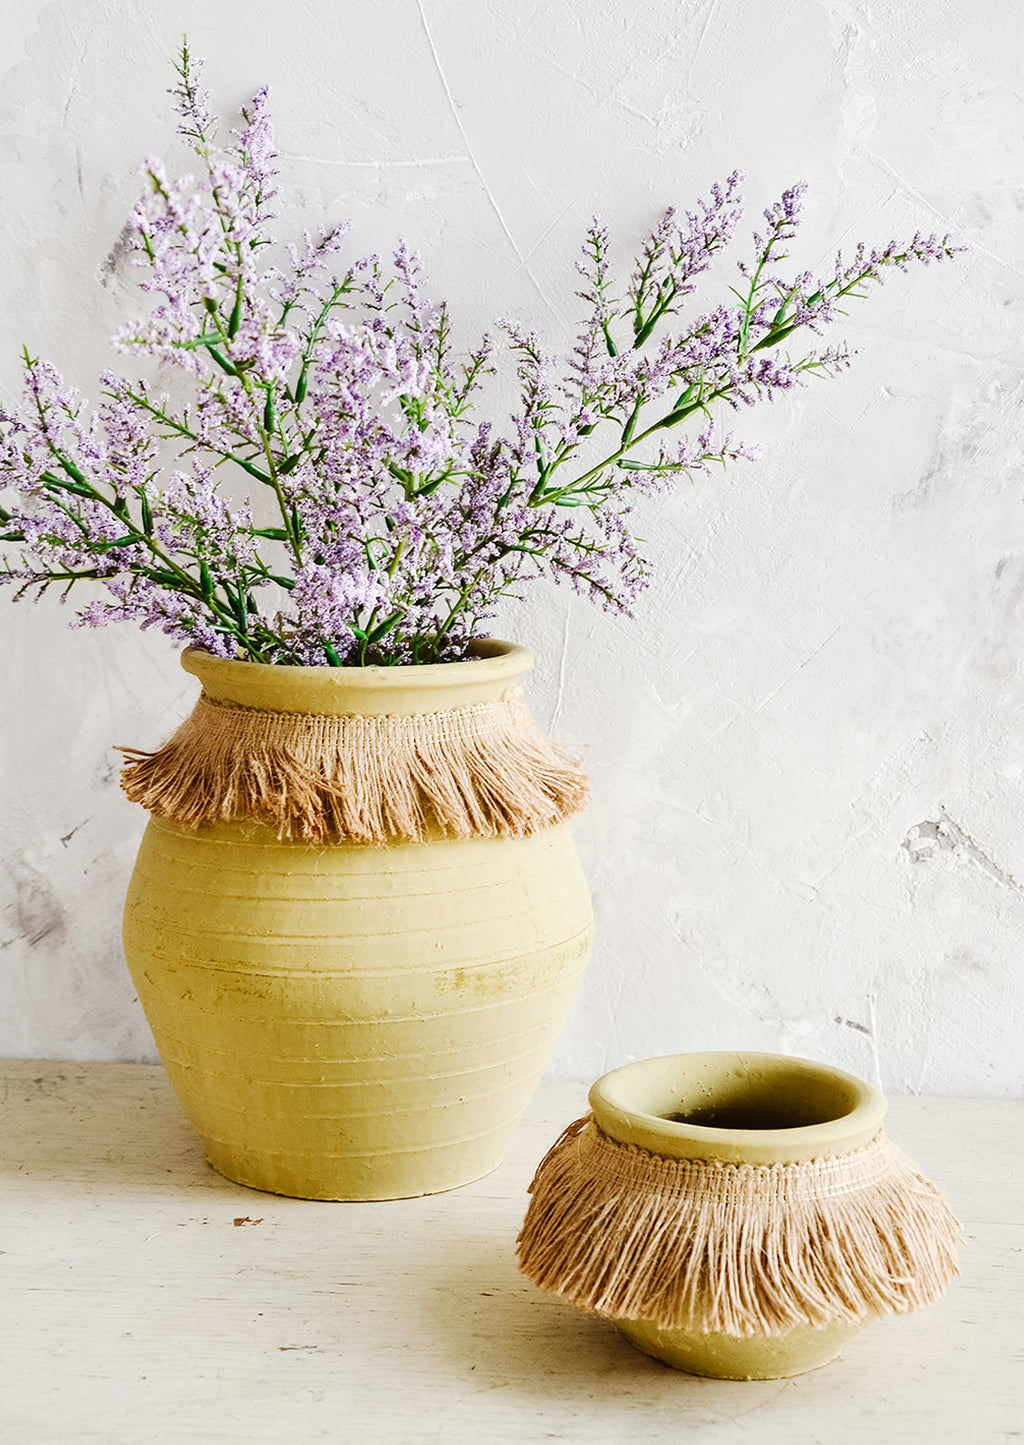 5: Clay pots with jute trim around neck, one displaying purple flowers